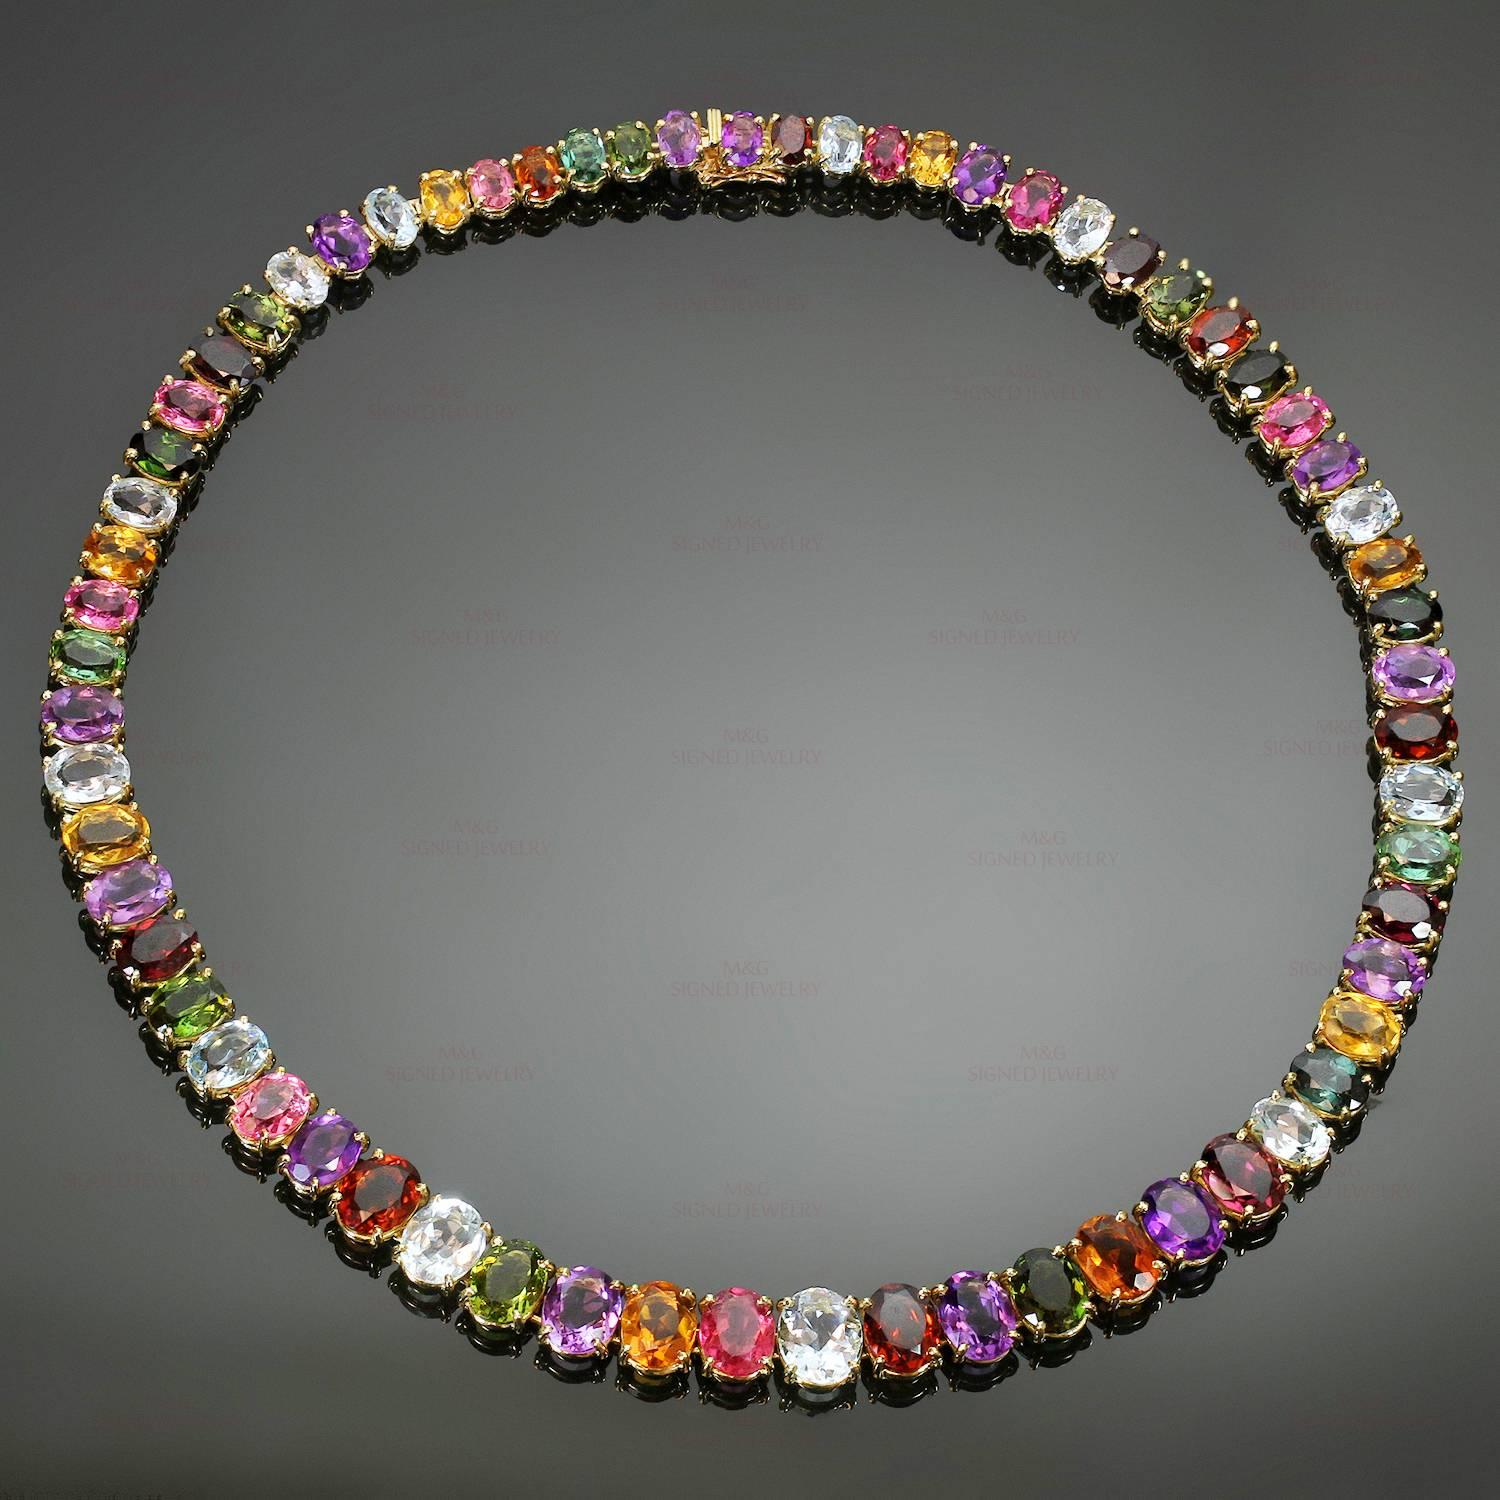 This stunning H. Stern necklace is crafted in 18k yellow gold and features a lively and sparkling array of colorful prong-set oval stones: medium purple amethyst with lavender hues, light blue medium to medium deep aquamarine, brownish and